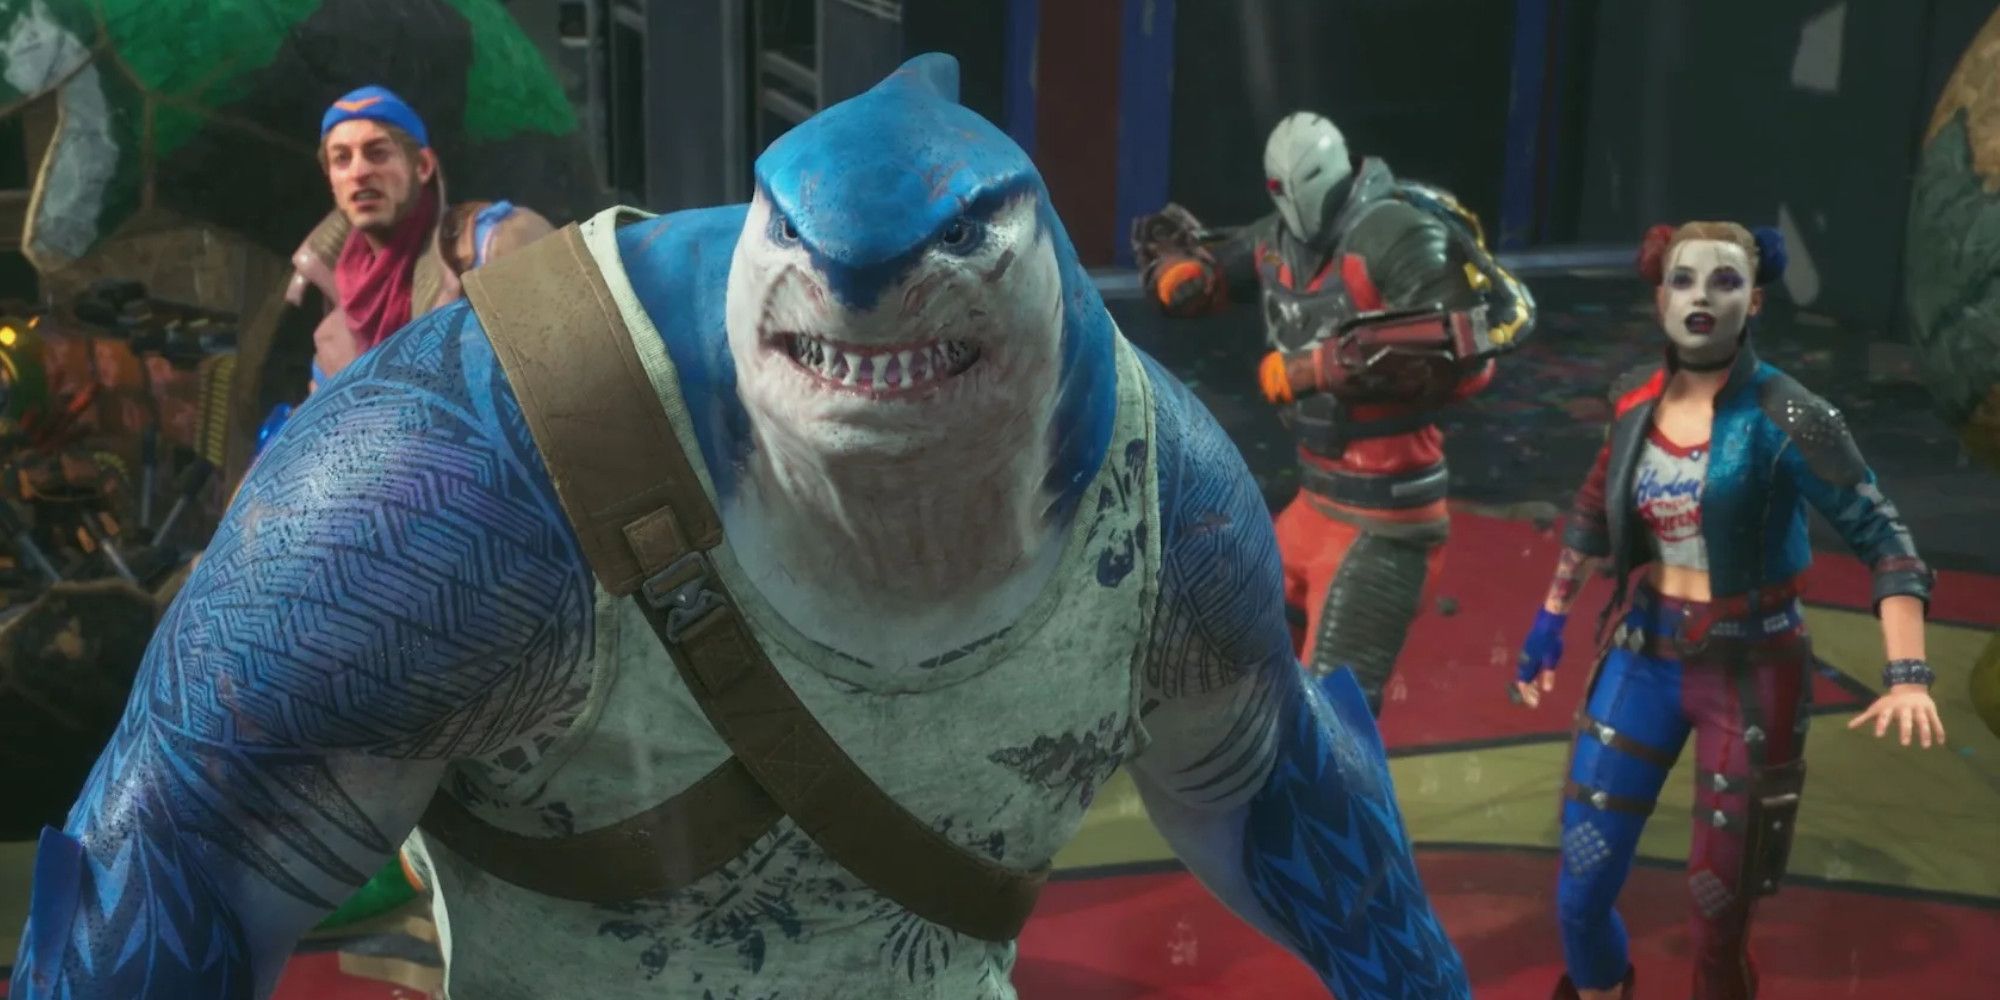 King Shark and the other members of the Suicide Squad in the background